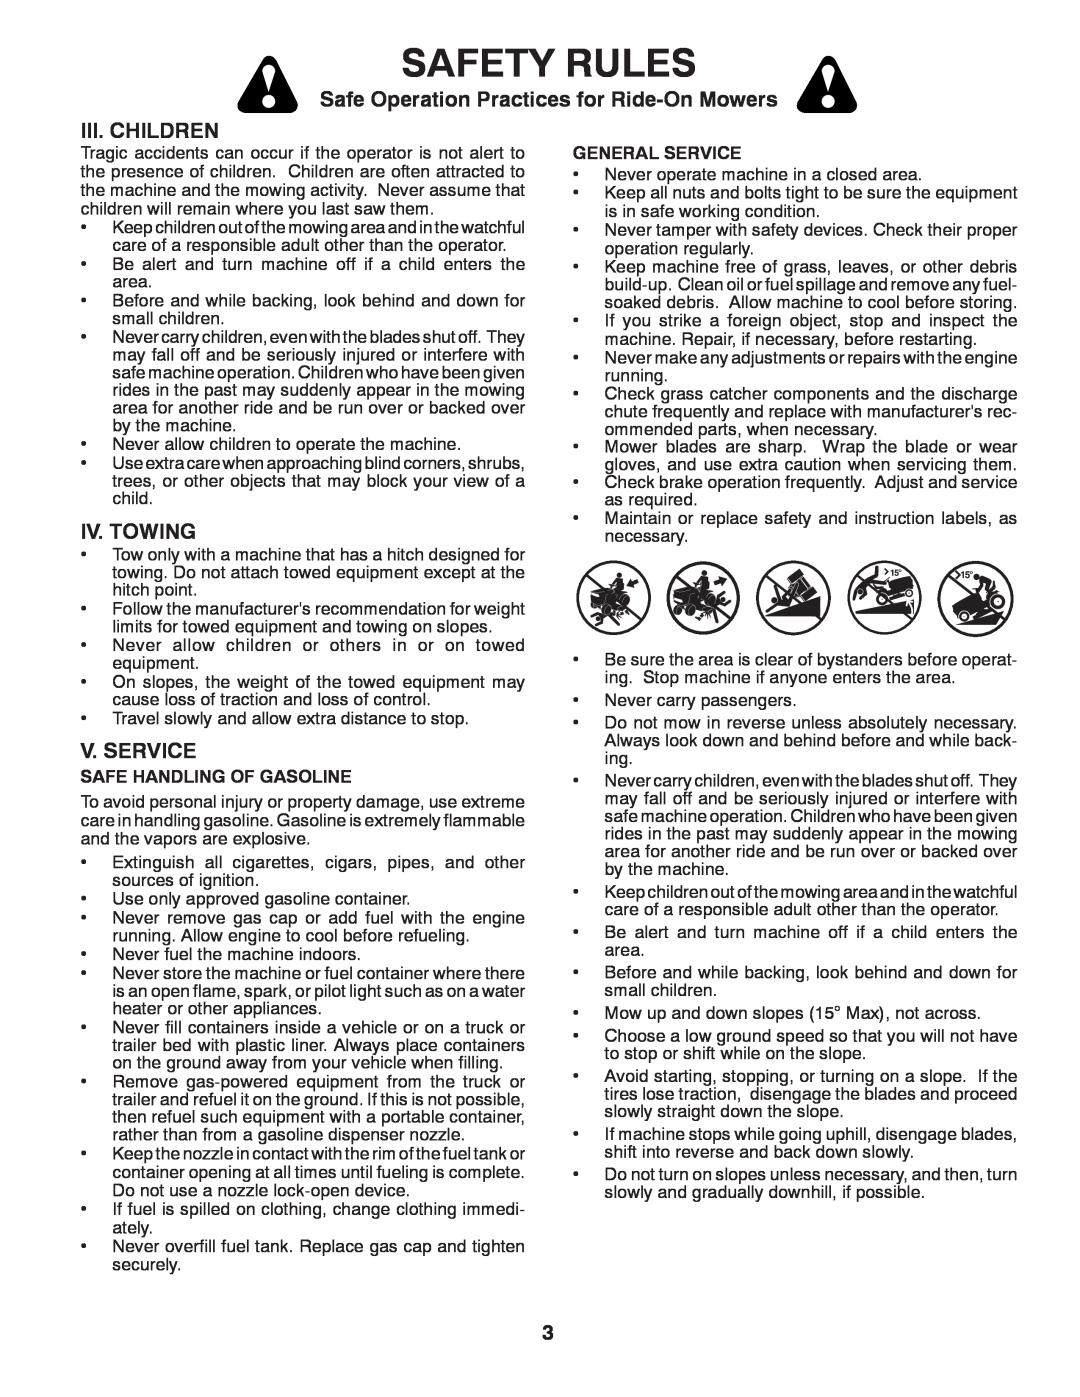 Husqvarna 917.24046 Iii. Children, Iv. Towing, V. Service, Safety Rules, Safe Operation Practices for Ride-On Mowers 